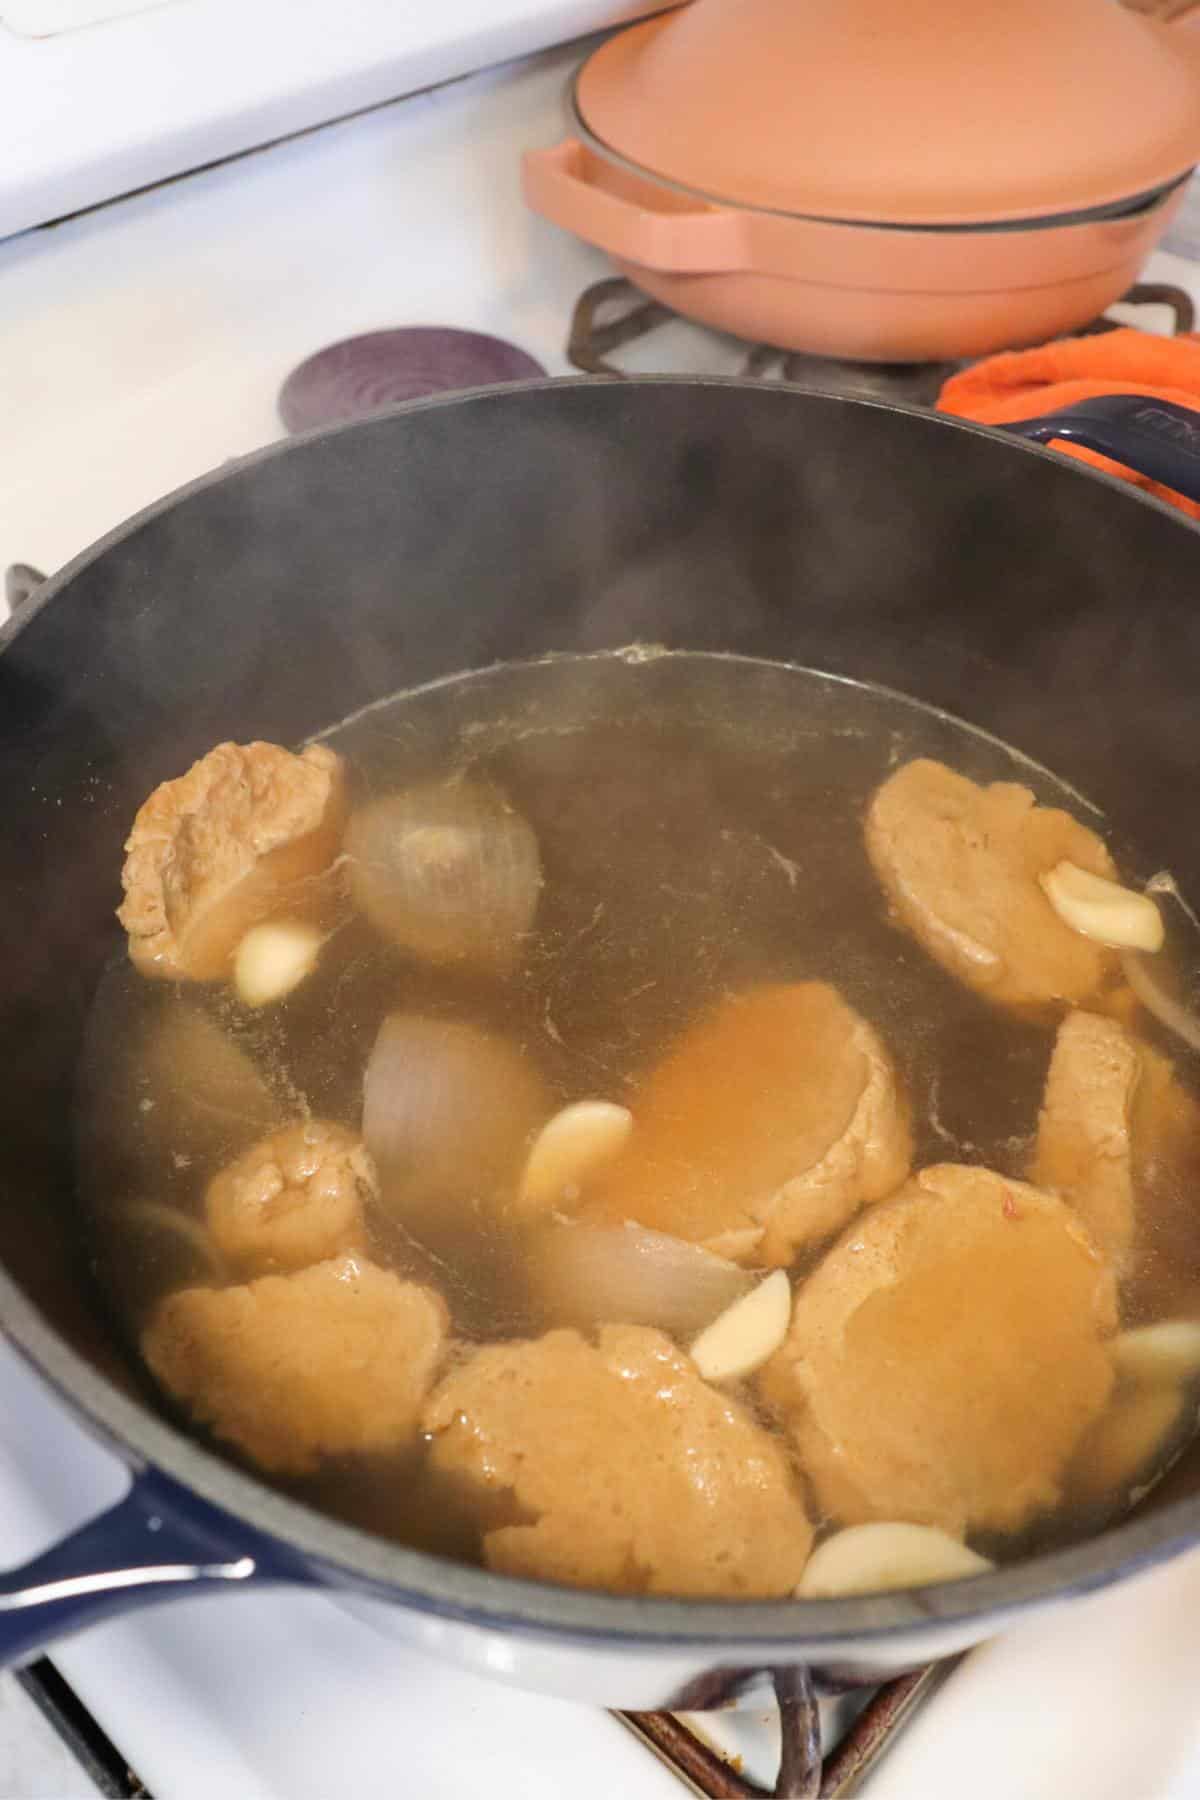 Seitan pieces simmering in a broth on the stove.